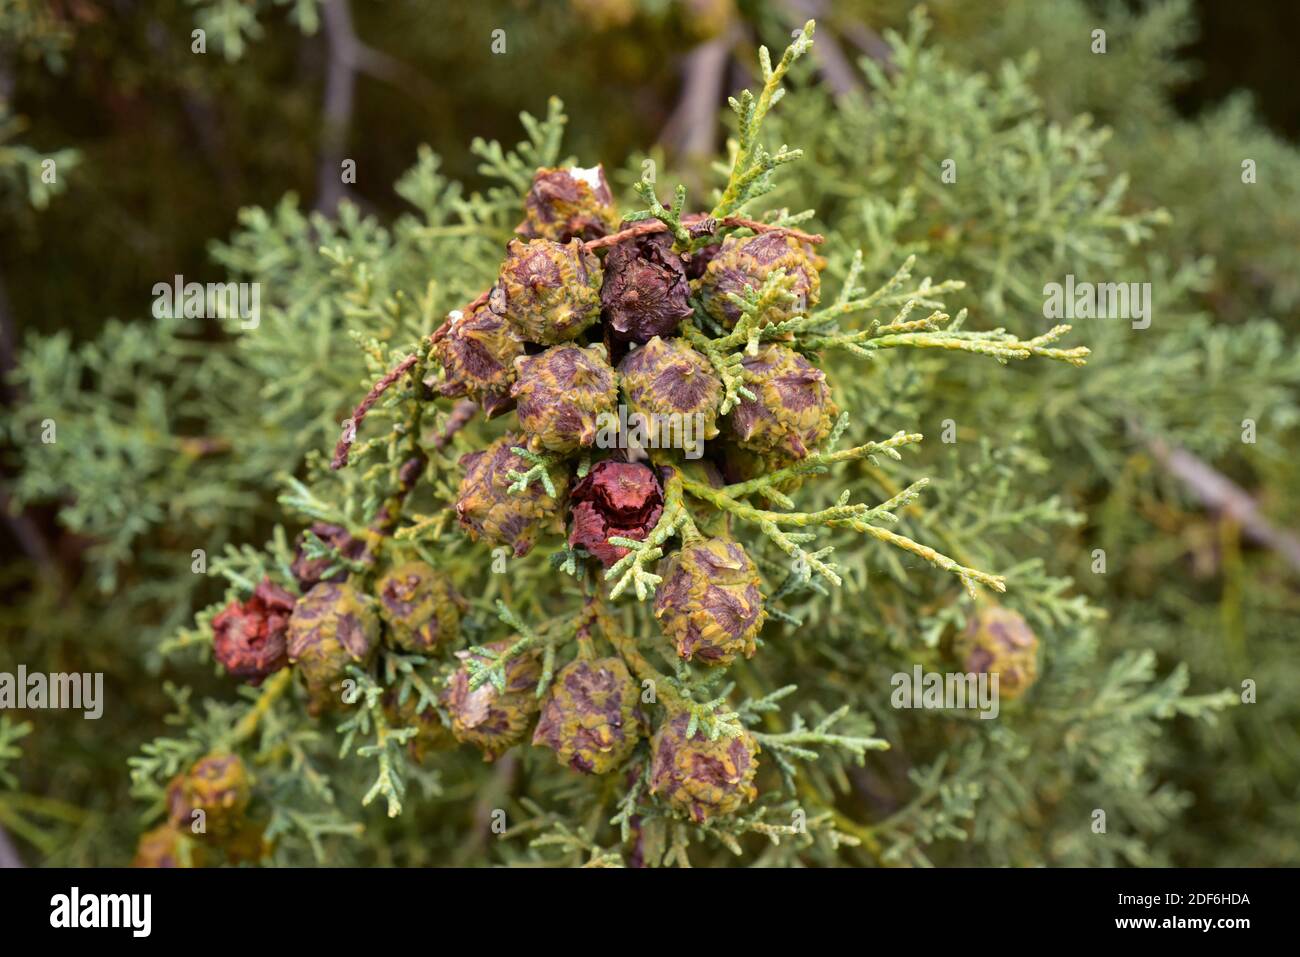 Arizona cypress (Cupressus arizonica) is a evergreen tree native to northwest Mexico and southwest USA. Cones and scale-like leaves detail. Stock Photo